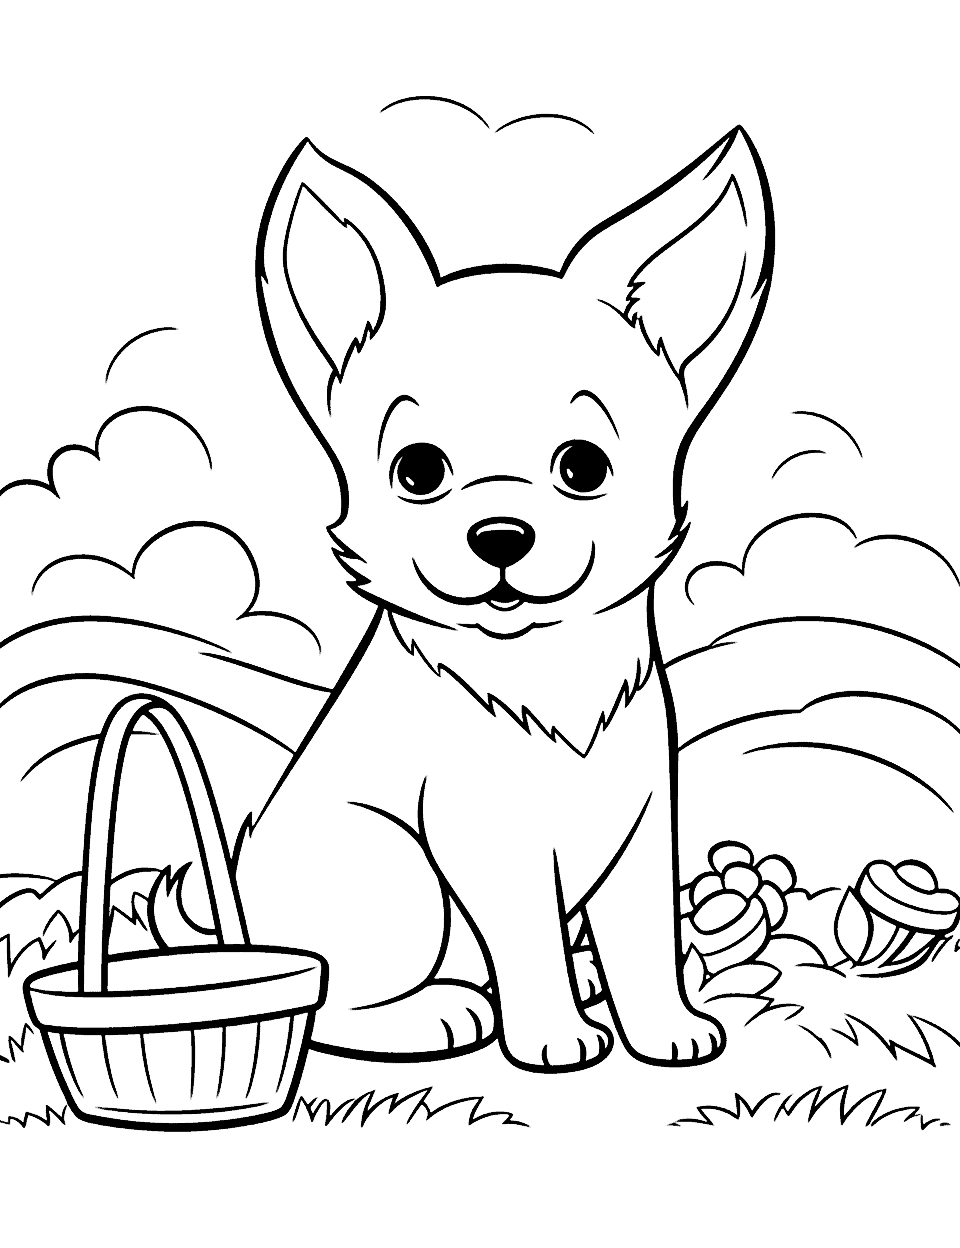 Picnic Time Corgi With Basket Puppy Coloring Page - A Corgi puppy sitting next to a picnic basket in a beautiful park.